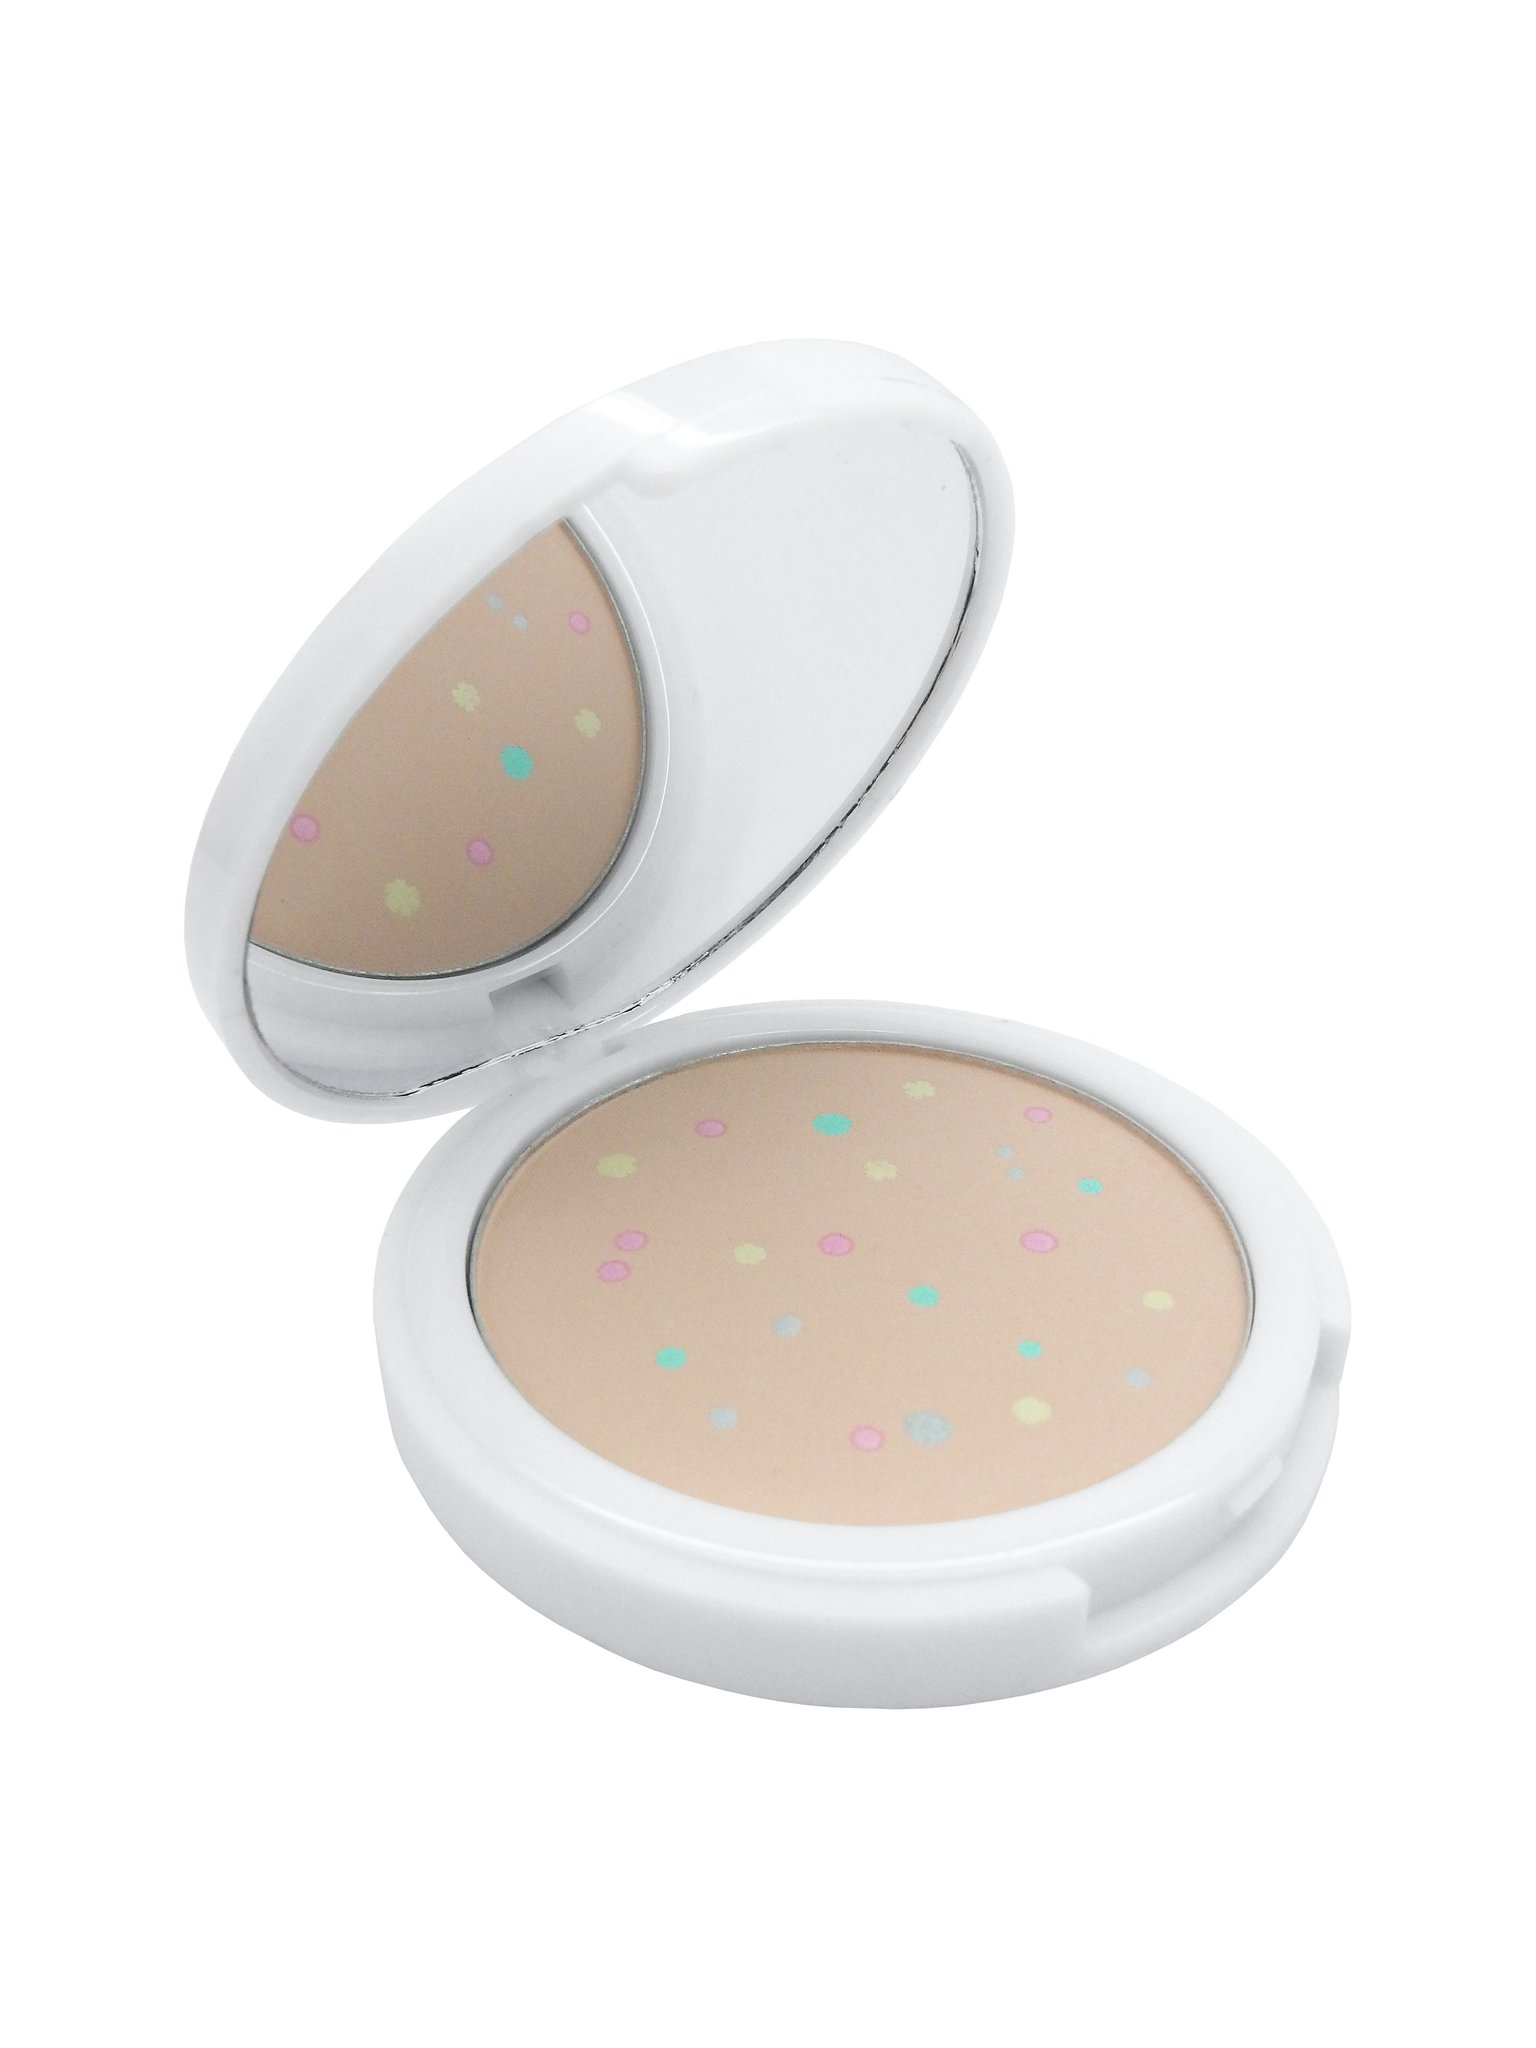 W7 Flawless face pressed mineral powder